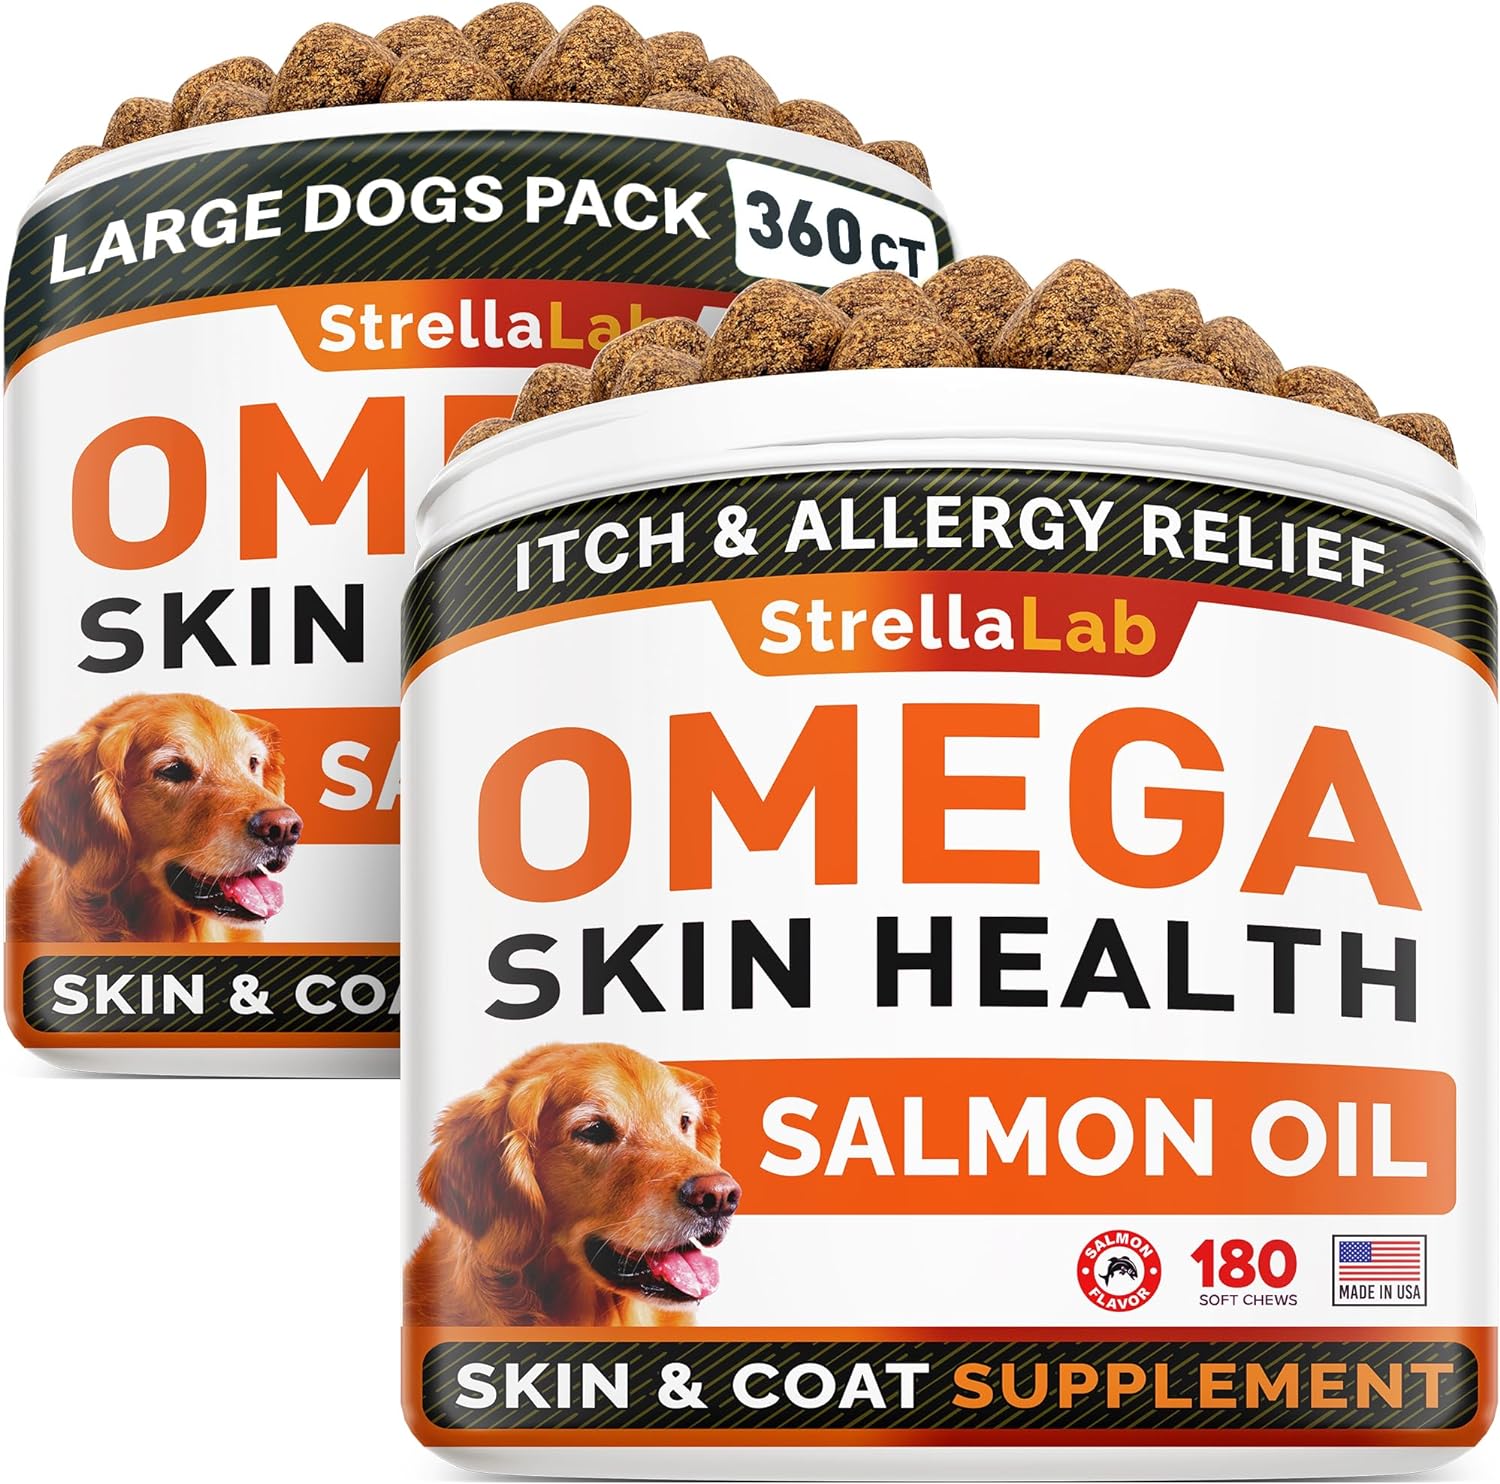 STRELLALAB Omega 3 for Dogs - (360Ct) Fish Oil Treats - Allergy & Itch Relief Skin&Coat Supplement - Dry Itchy Skin, Shedding, Hot Spots Treatment, Anti Itch - Pet Salmon Oil Chews - Salmon Flavor